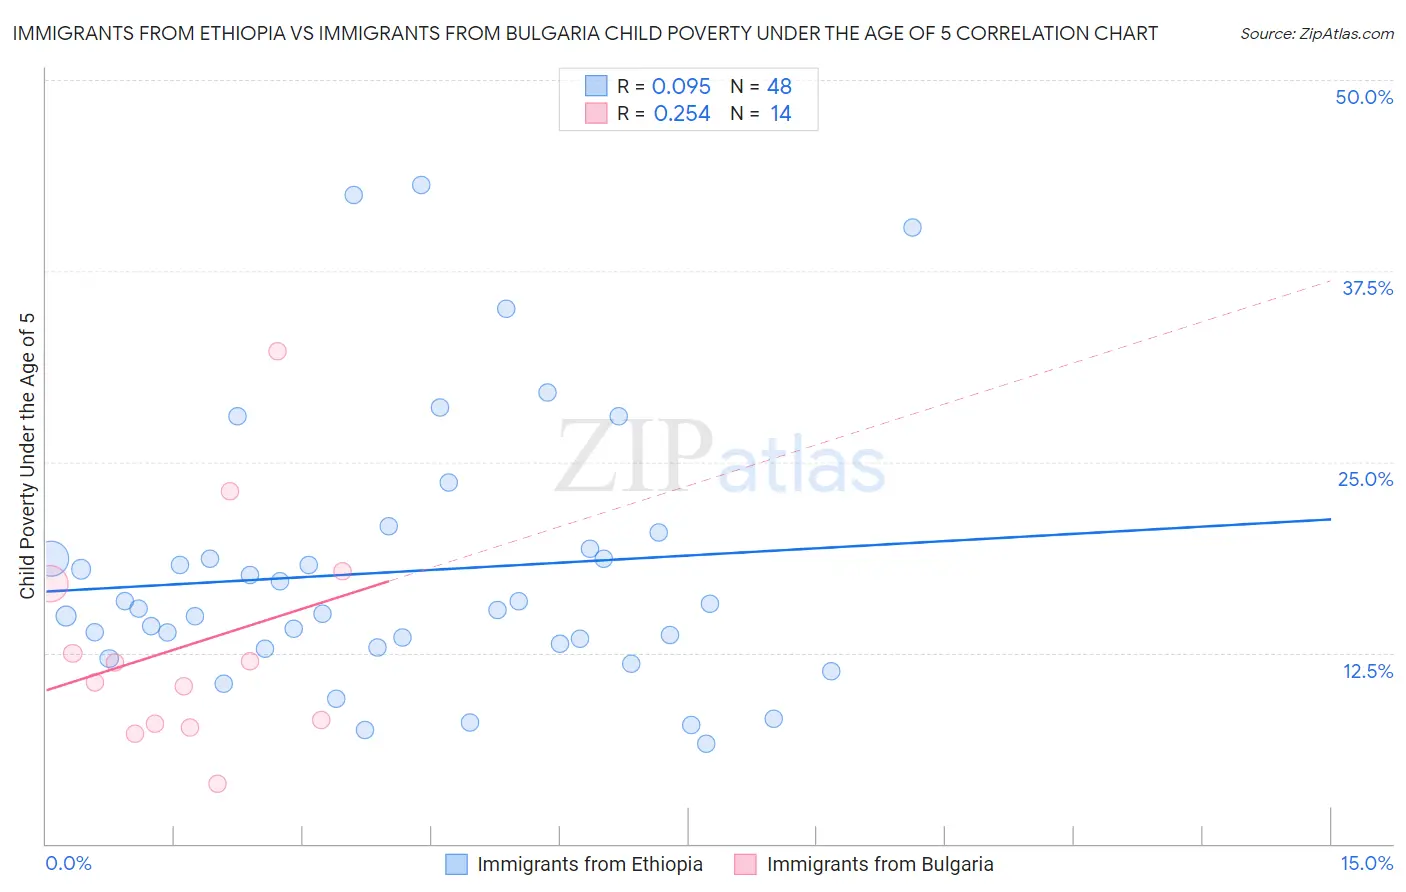 Immigrants from Ethiopia vs Immigrants from Bulgaria Child Poverty Under the Age of 5